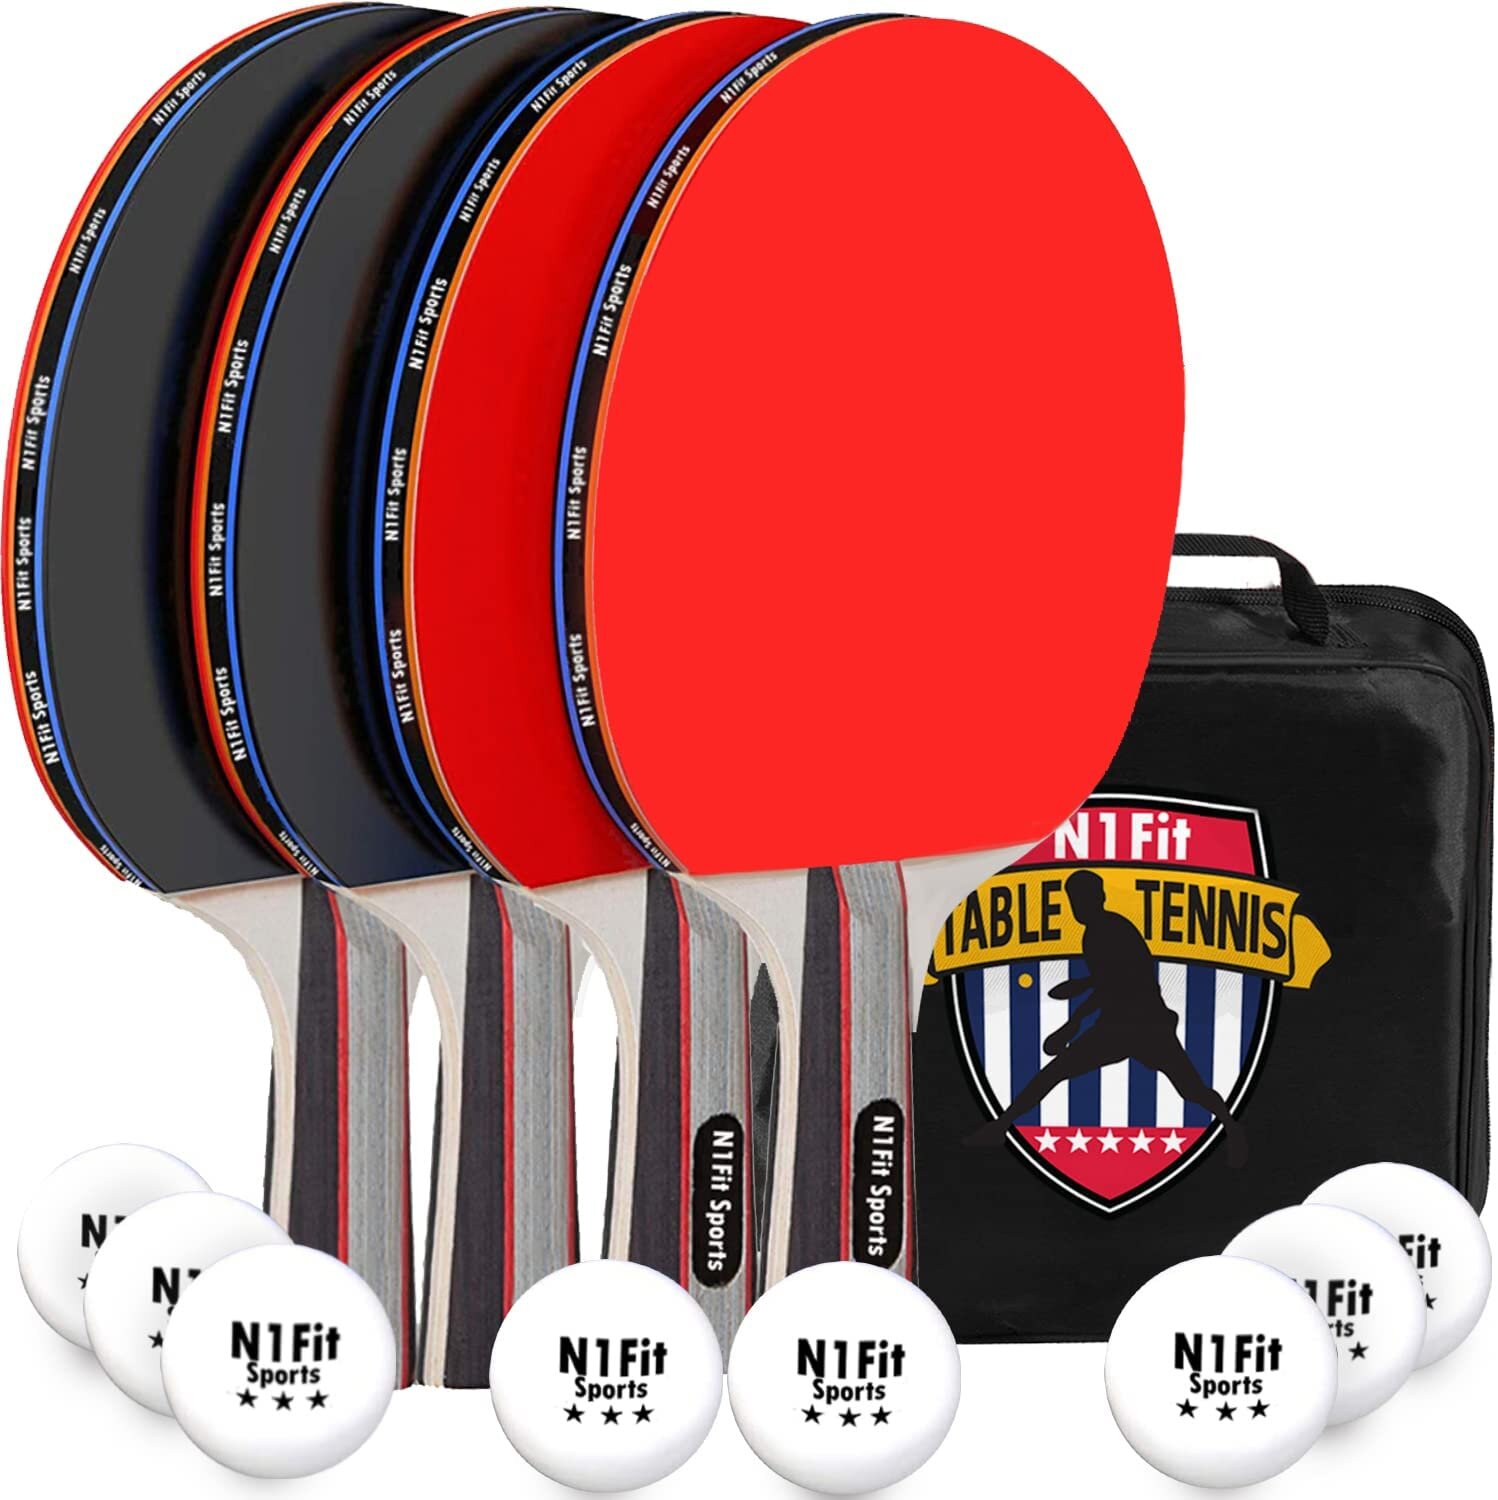 Table Tennis Ping Pong Professional Official Size Sports Paddle Racket Set Blue 